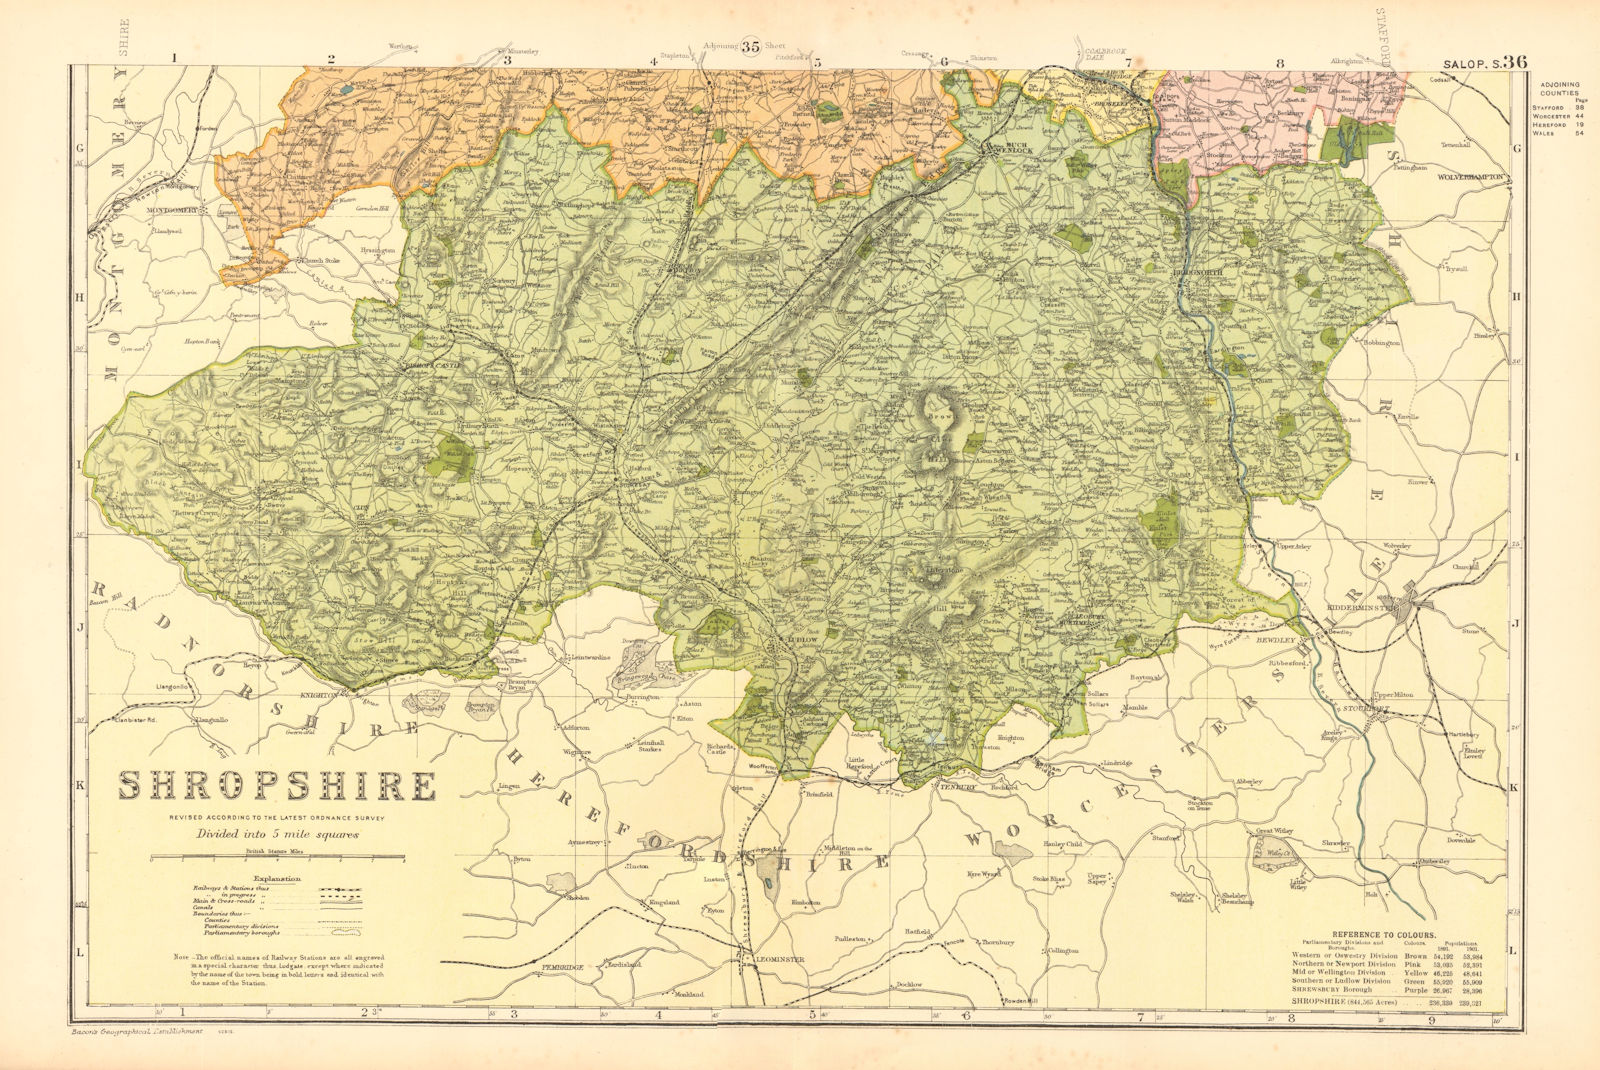 SHROPSHIRE (SOUTH). Showing Parliamentary divisions & parks. BACON 1904 map